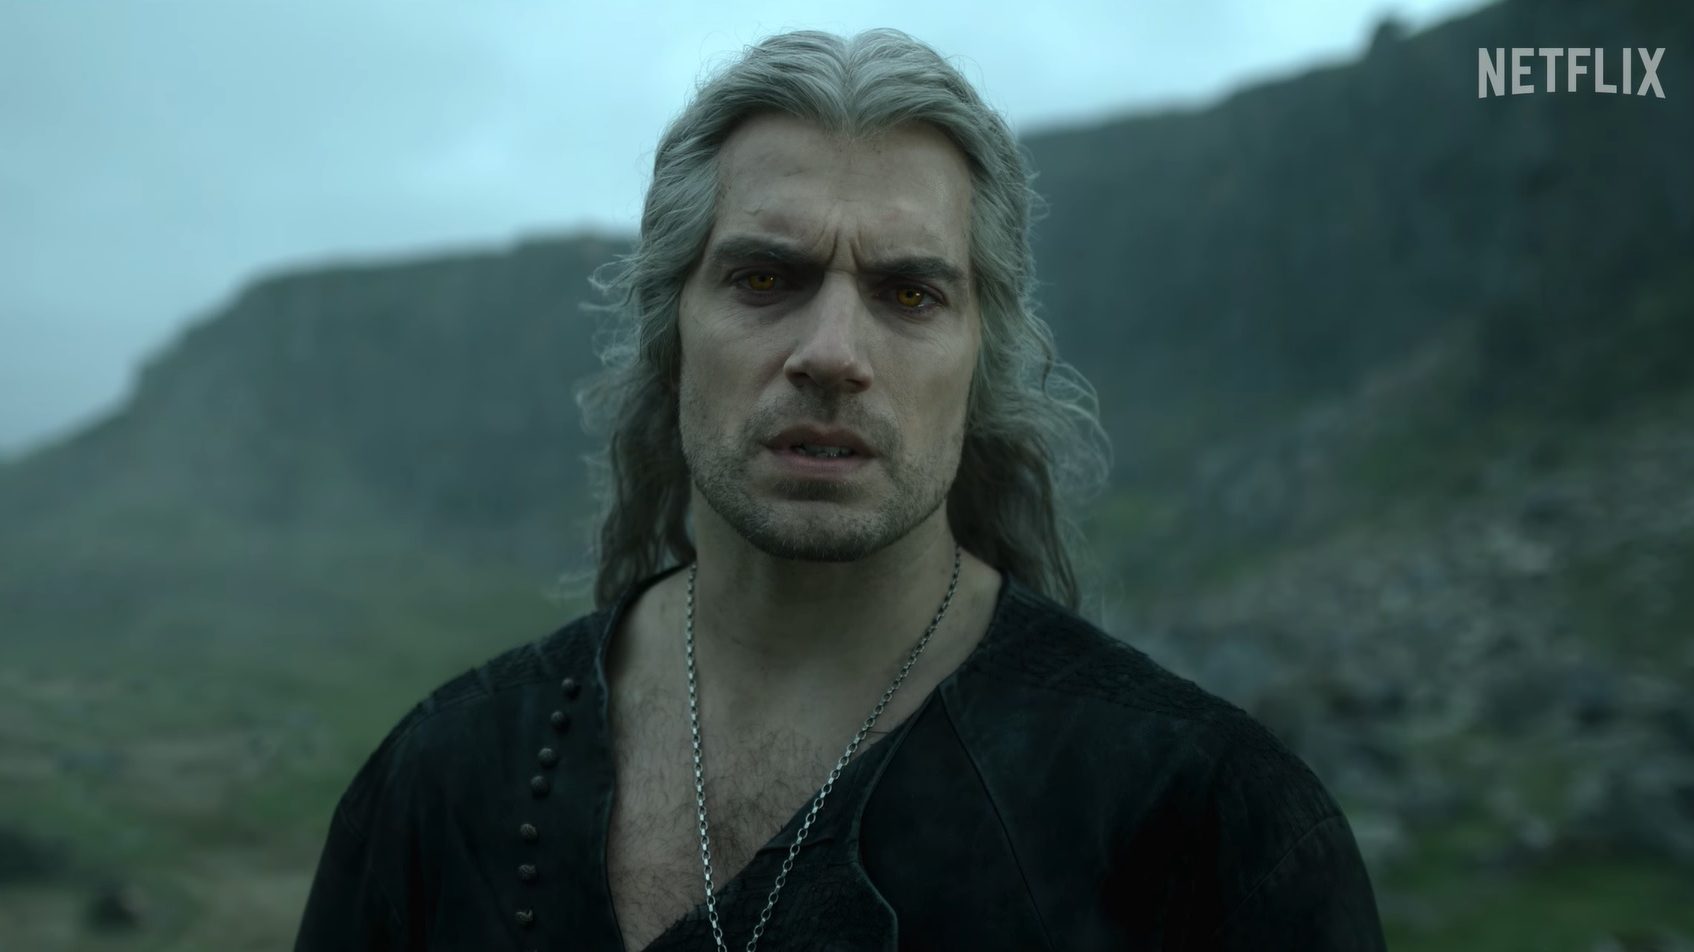 When Does The Witcher Season 3 Part 2 Come Out? Trailer, First